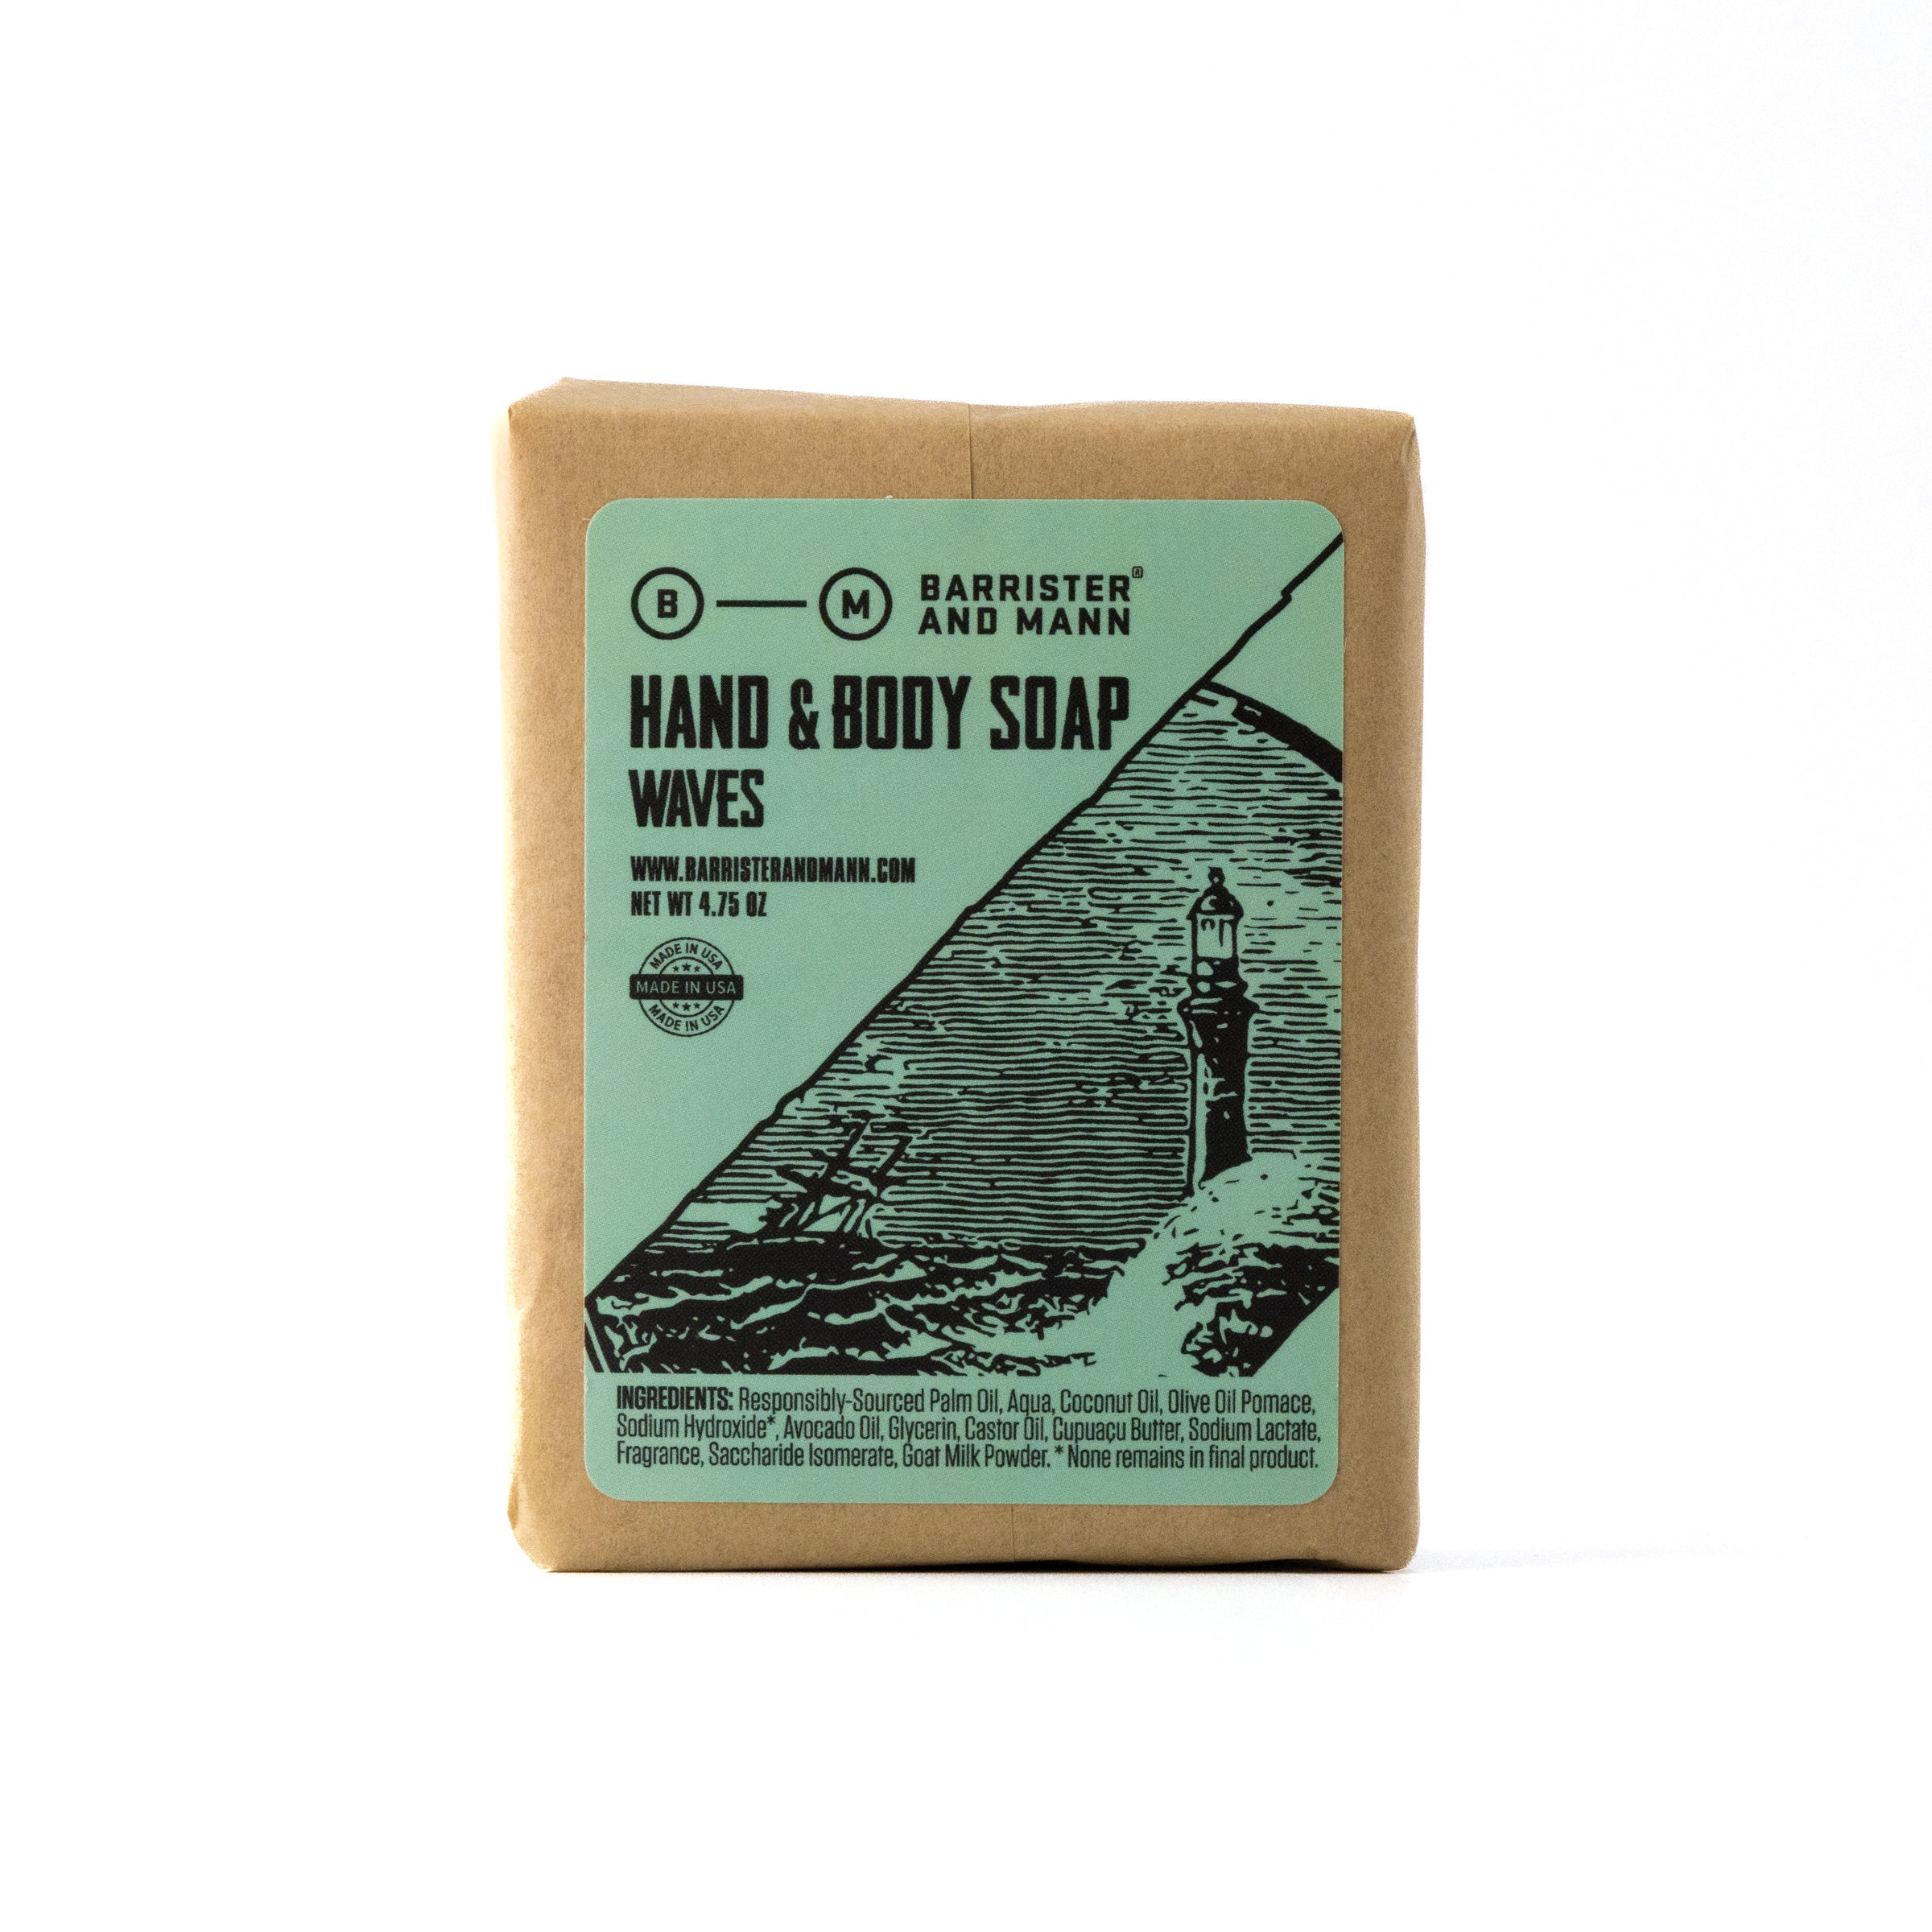 Hand & Body Soap: Waves - Barrister and Mann LLC